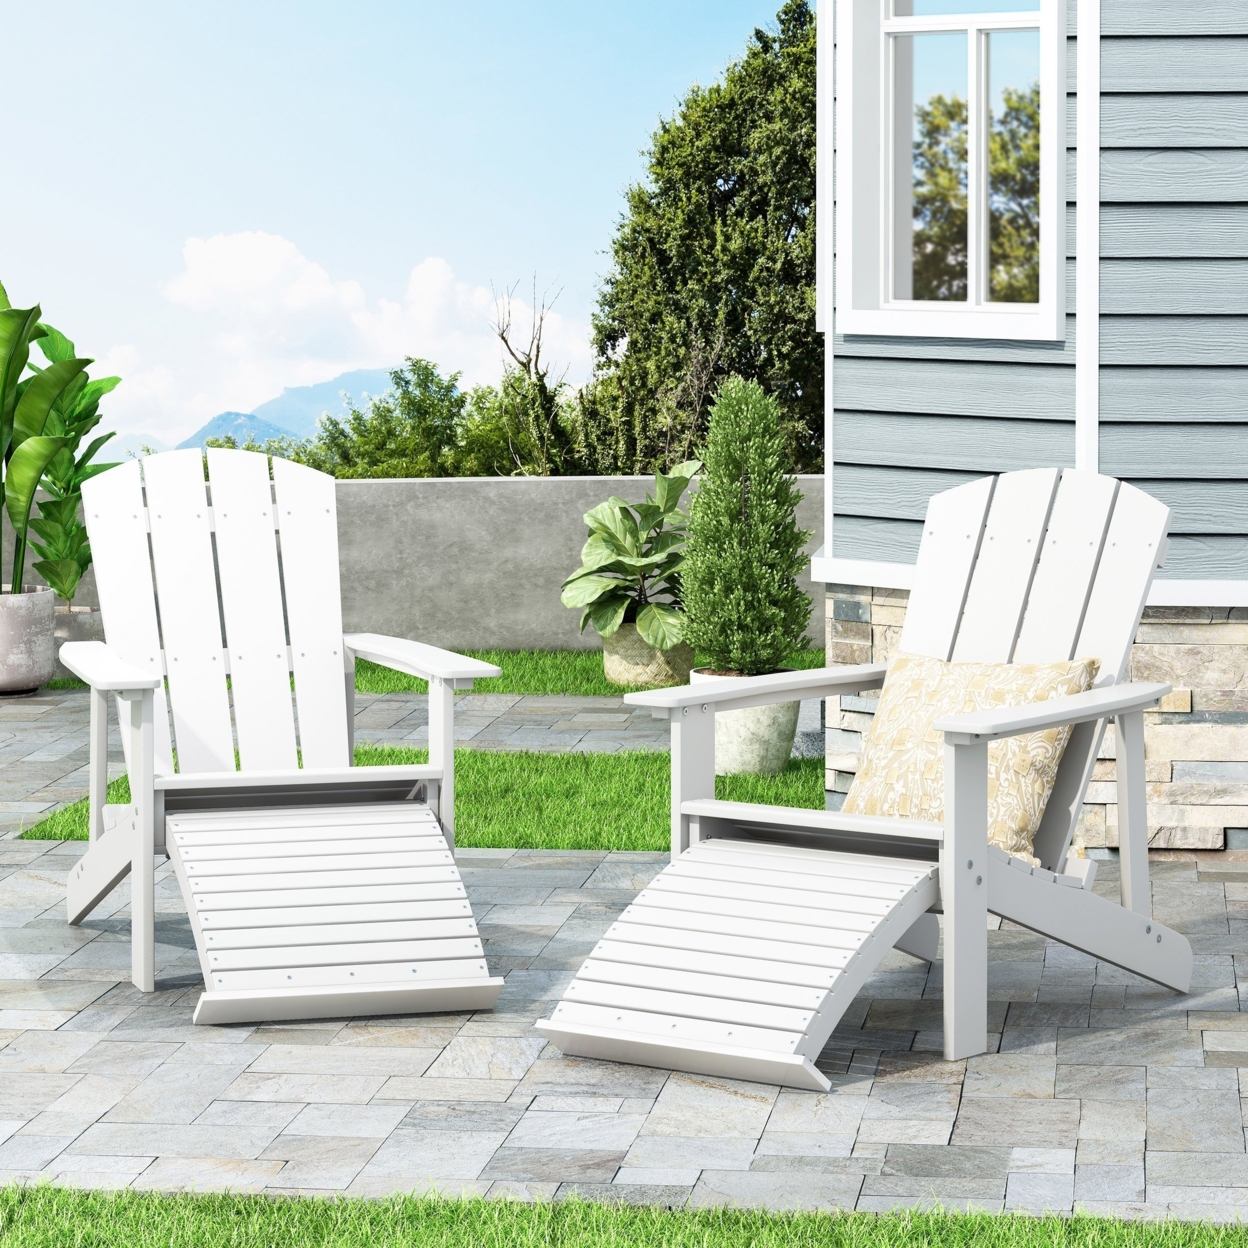 Matriel Outdoor Adirondack Chair With Retractable Ottoman (Set Of 2) - Black